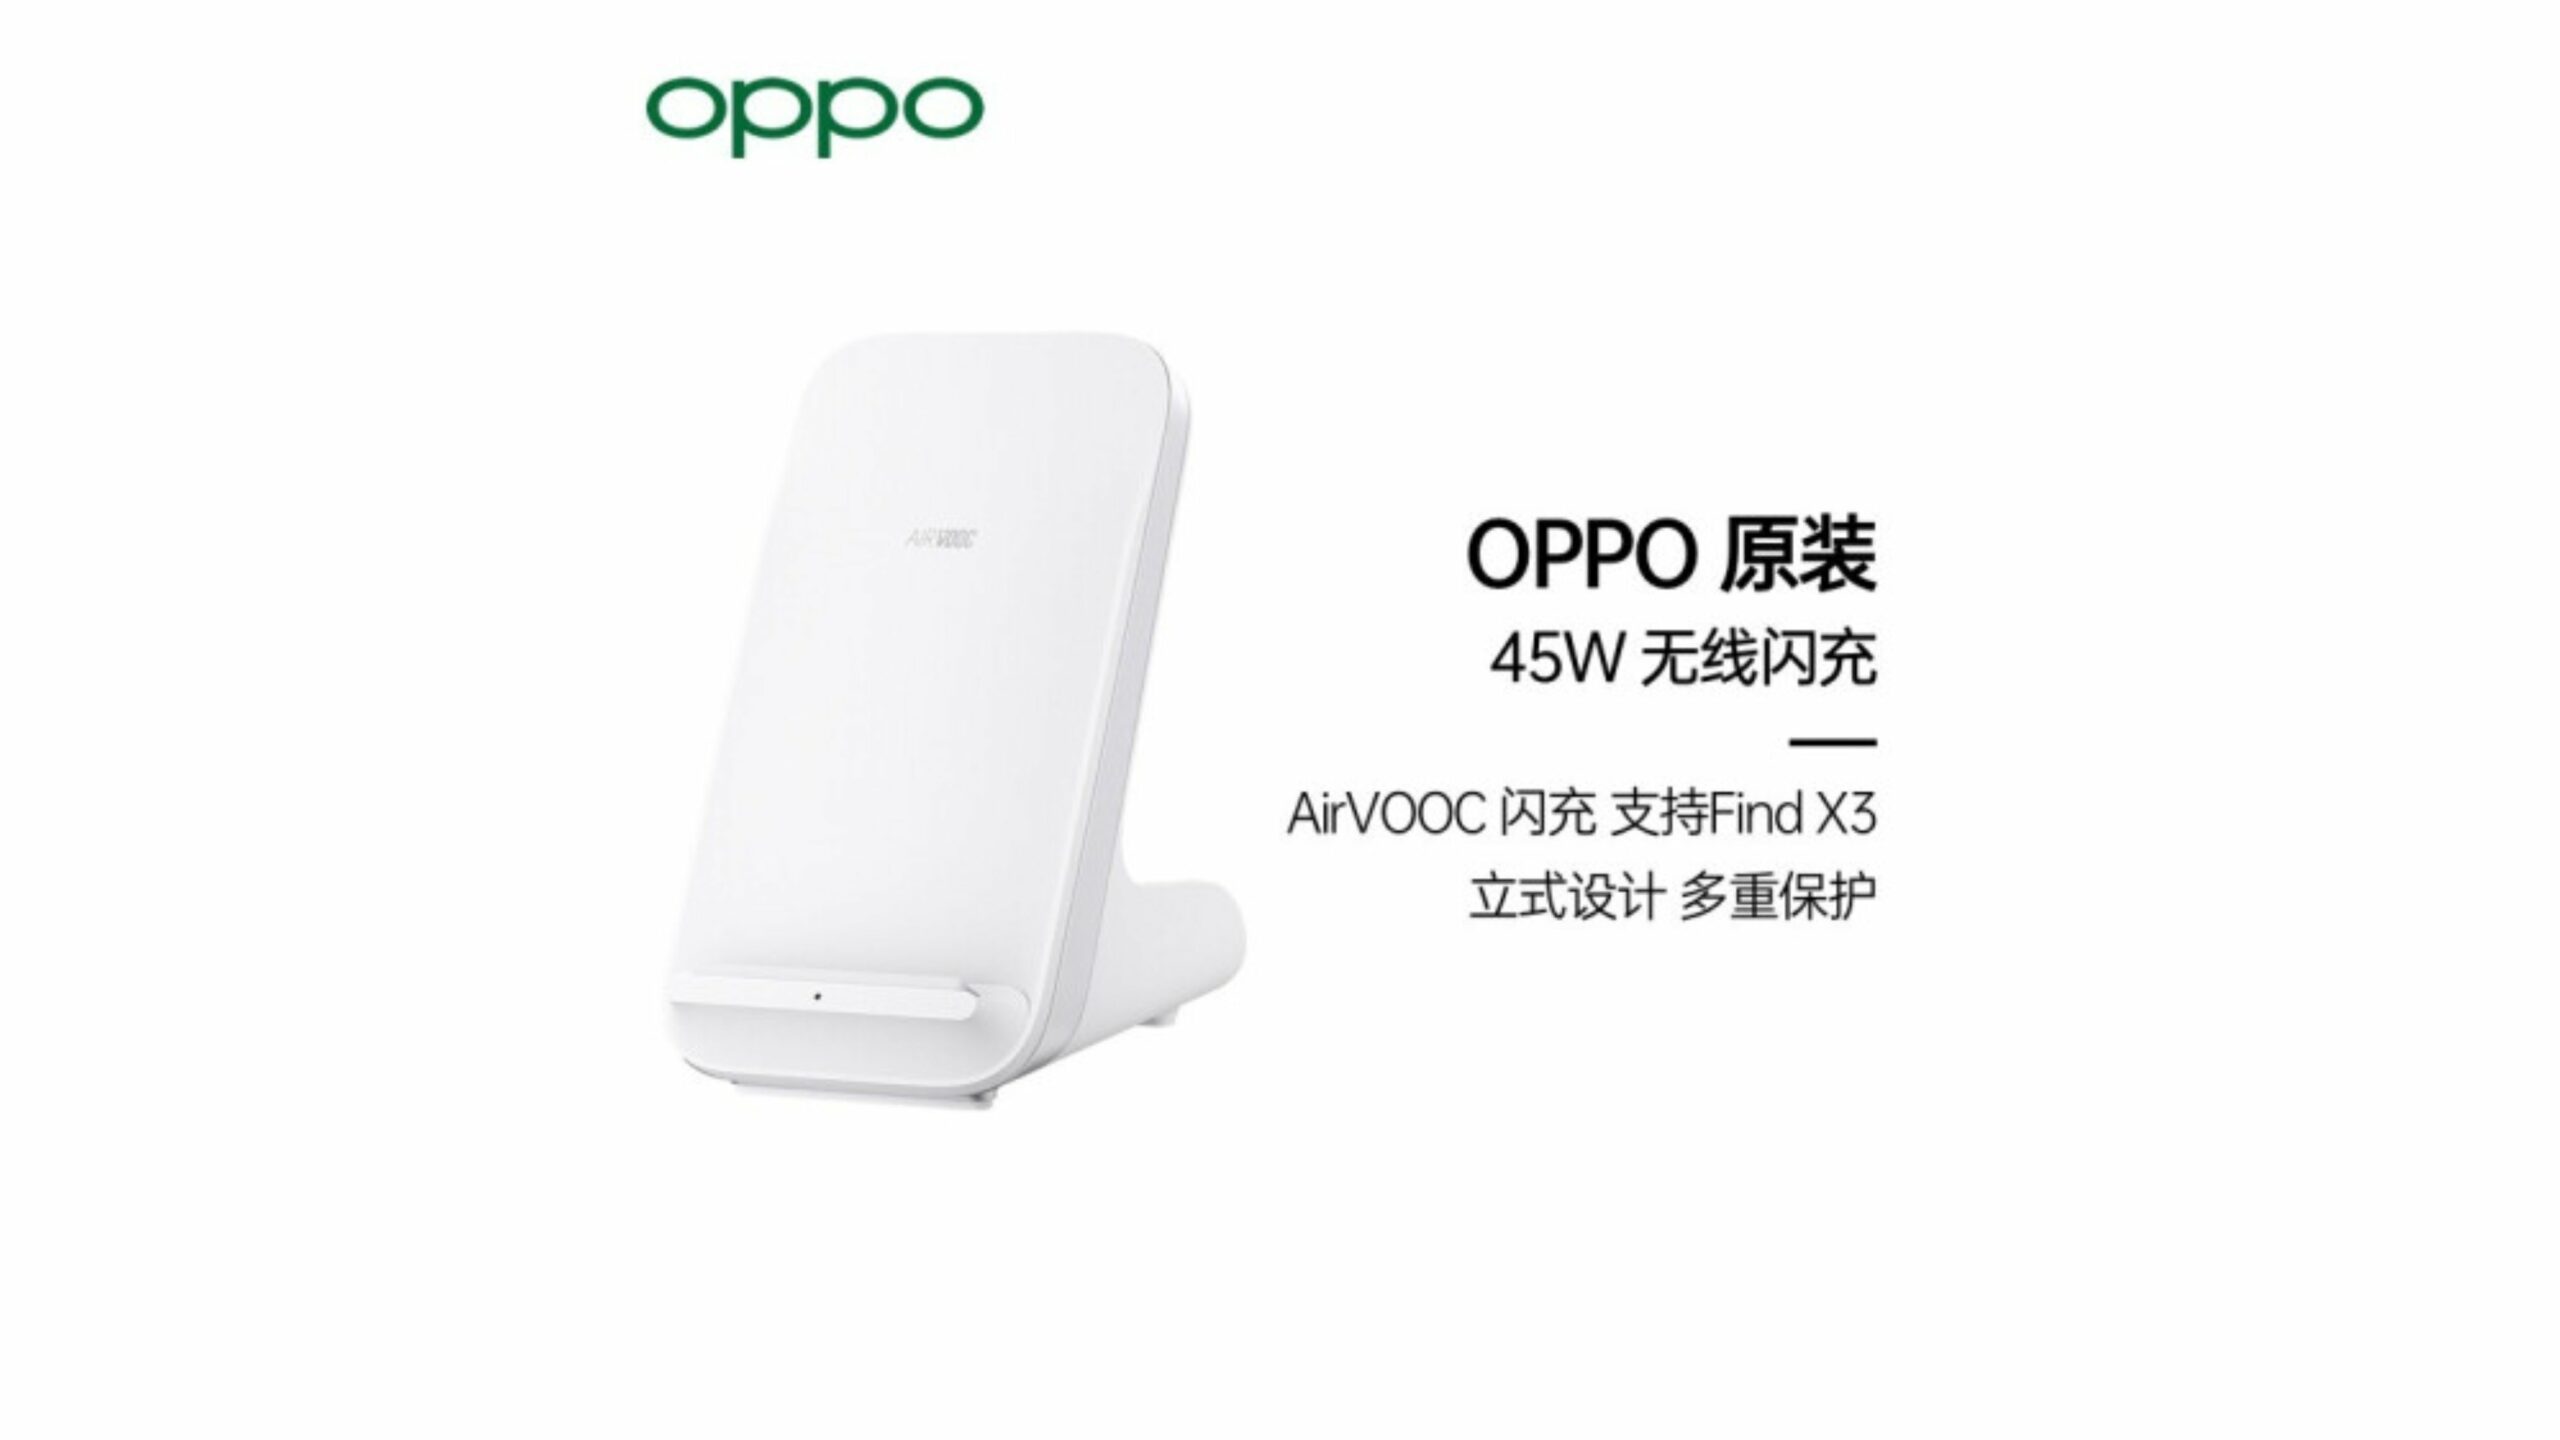 OPPO AirVOOC 45W triedleaze lader featured